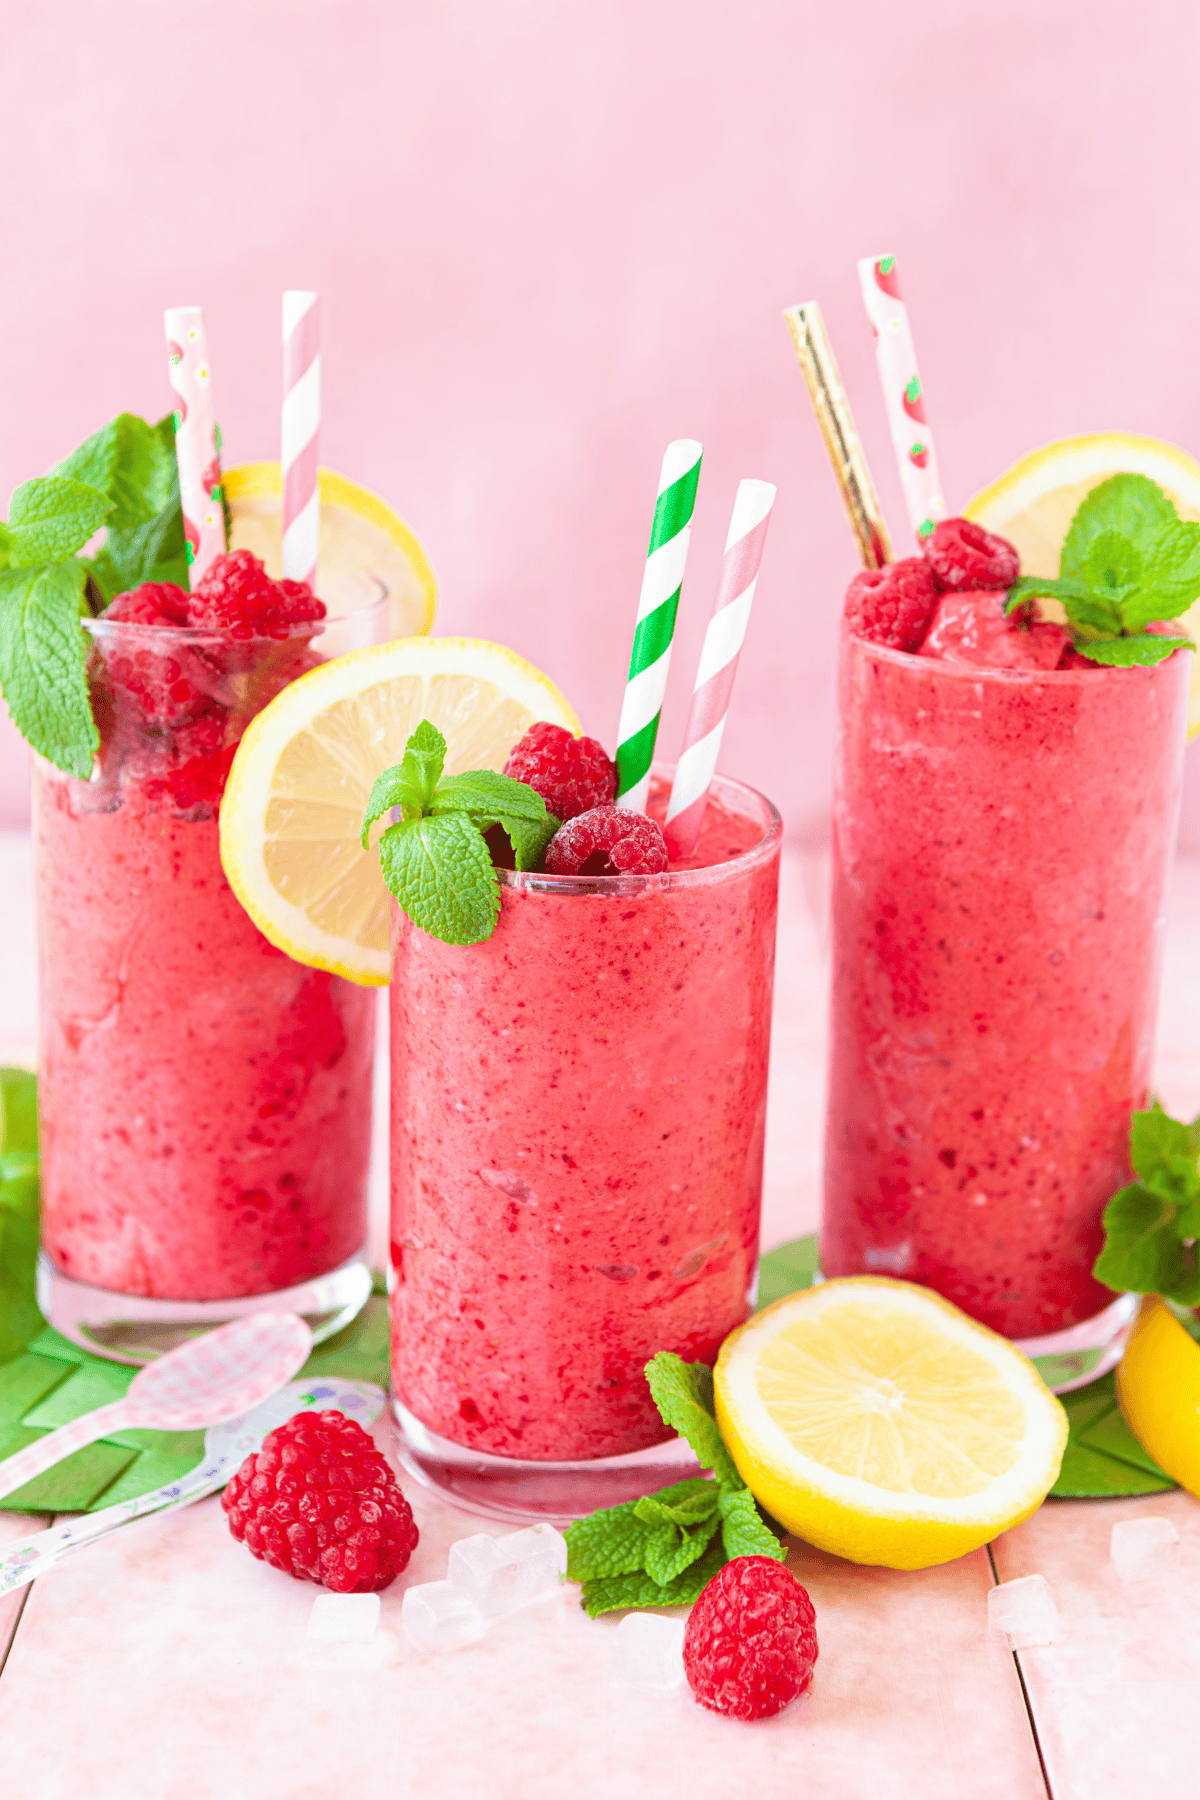 Glasses of a party alcoholic beverage garnished with mint and fresh fruits.